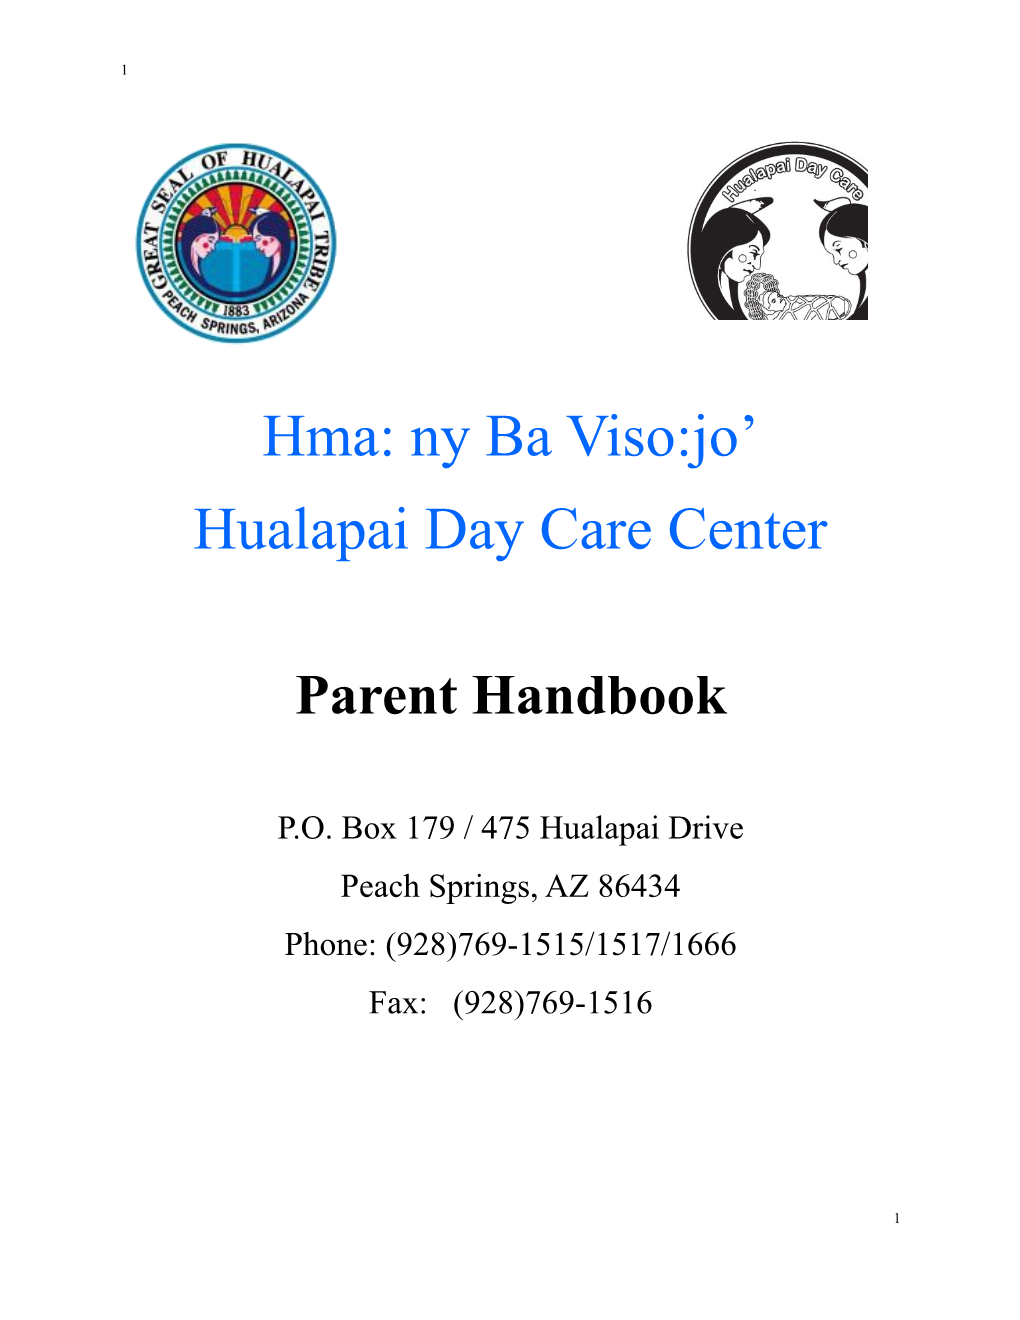 Hualapai Day Care Center